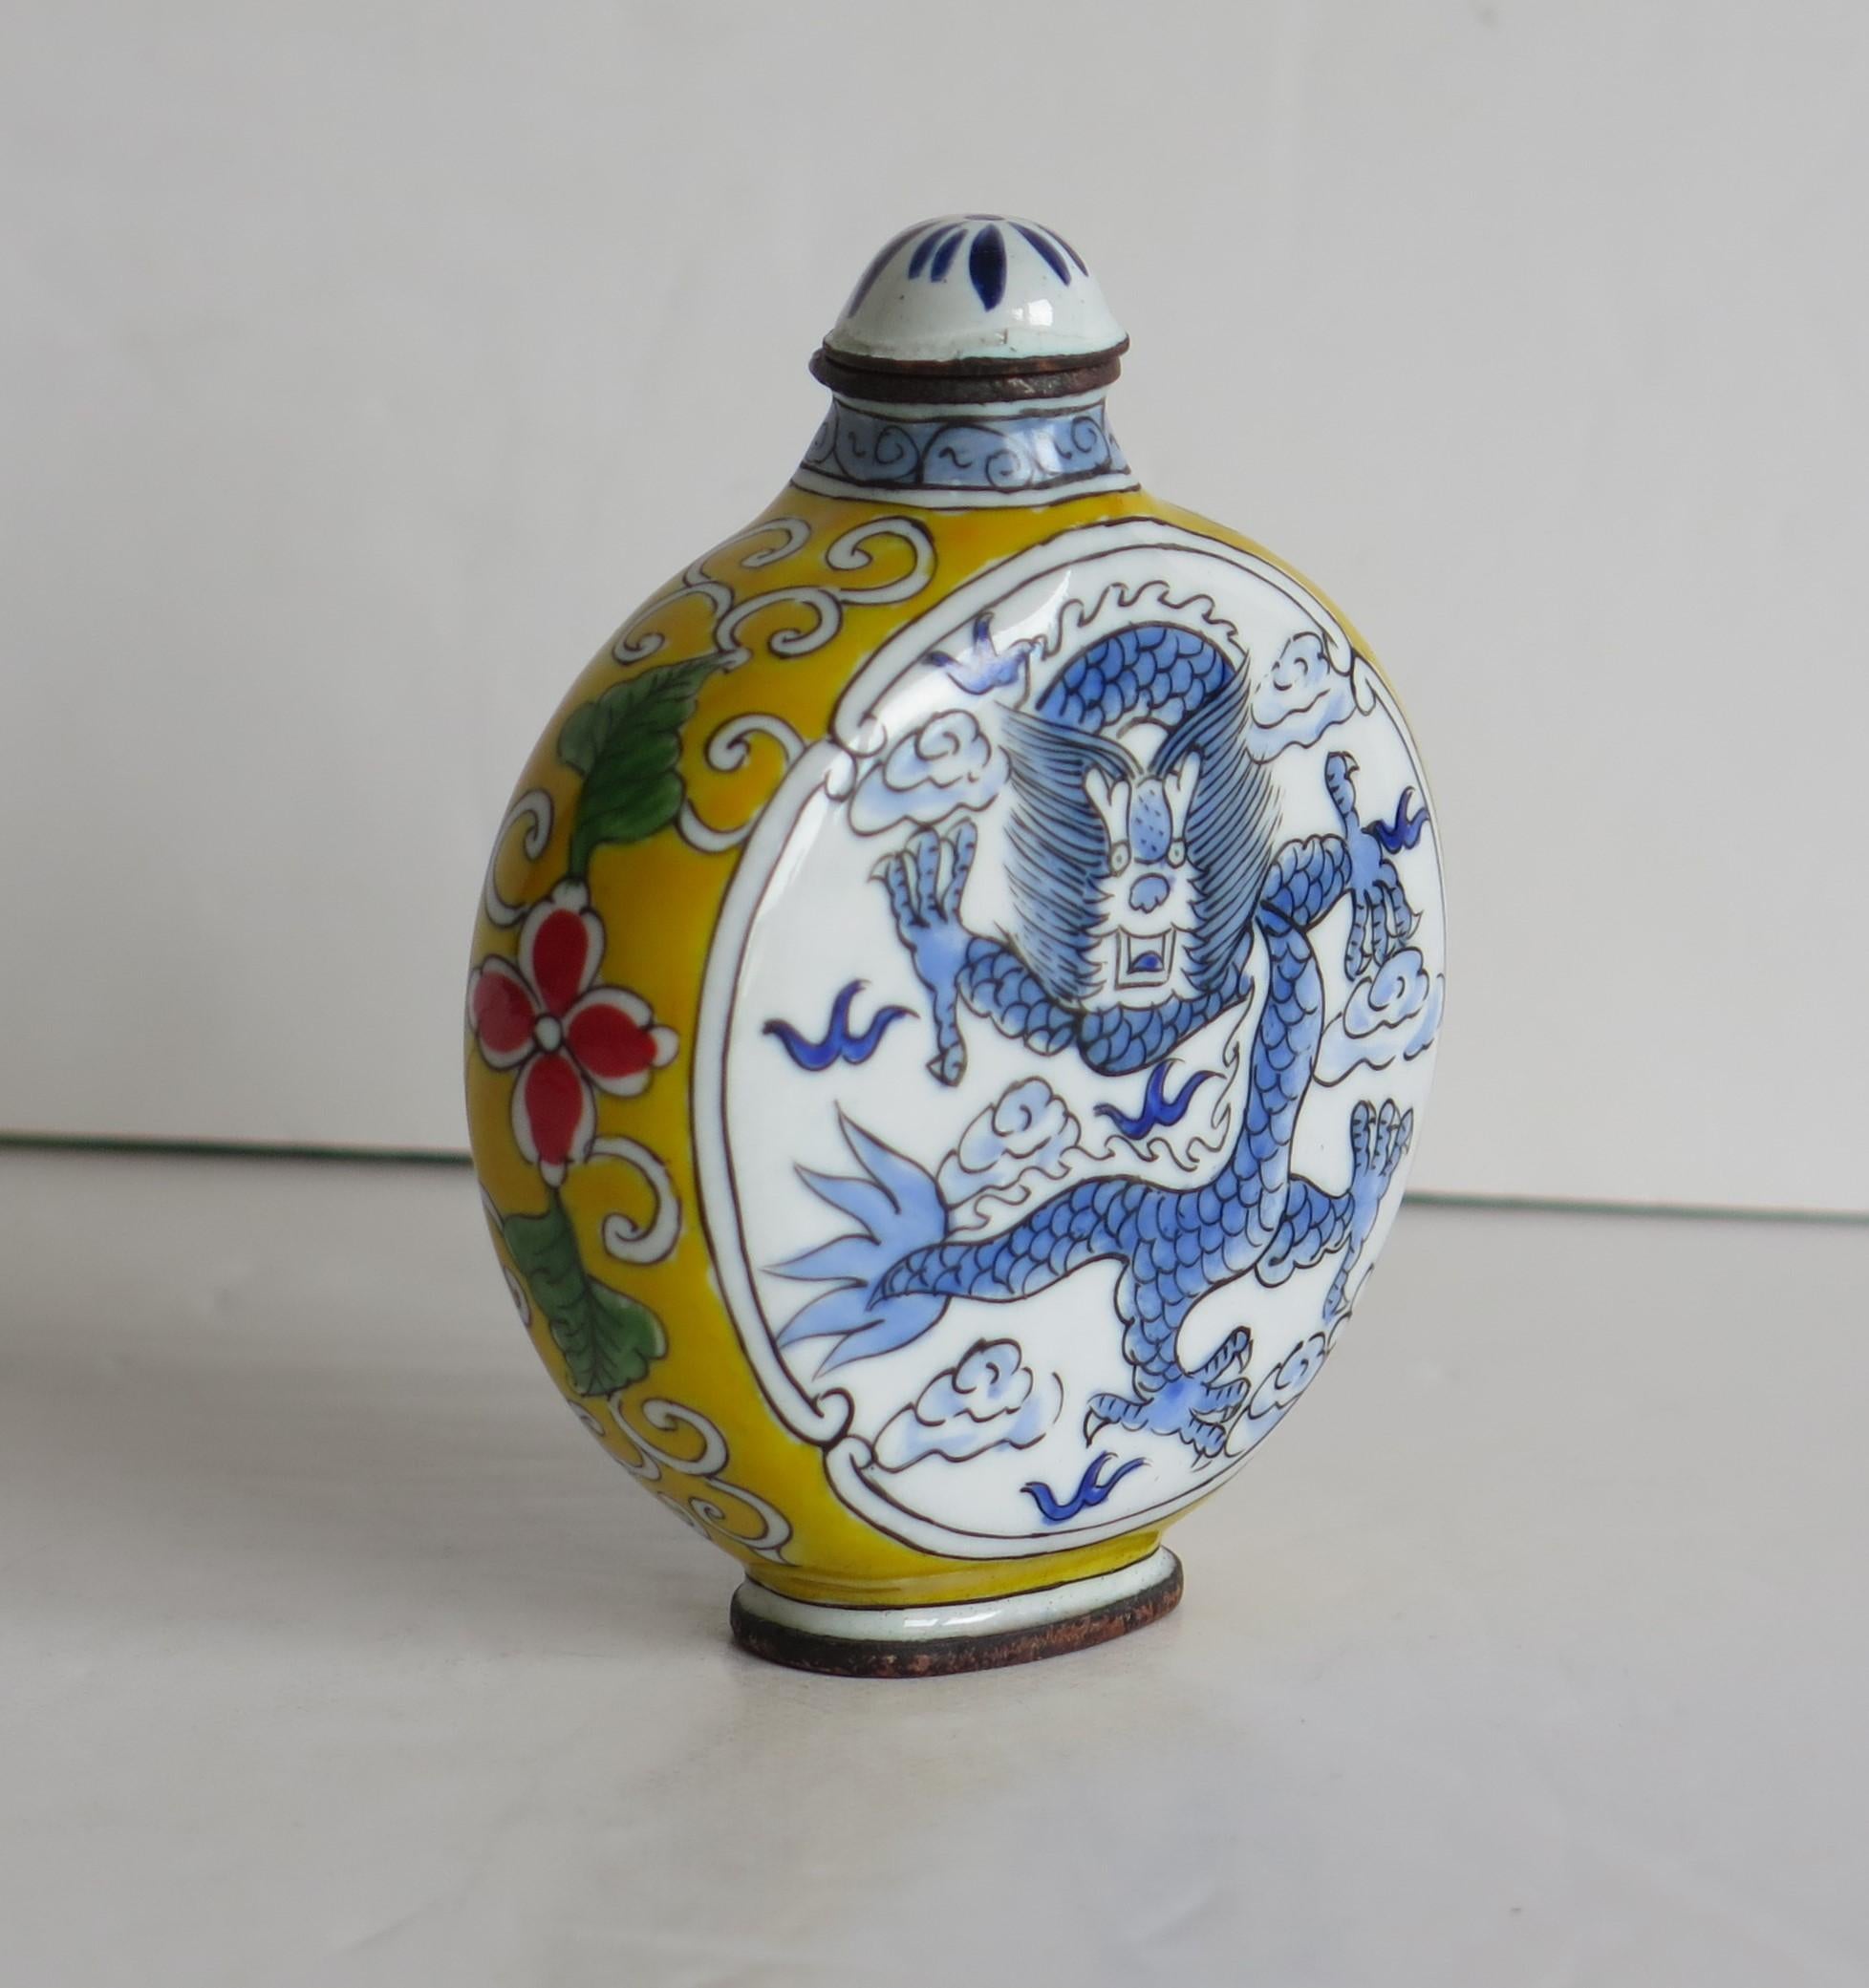 Qing Chinese Snuff Bottle Hand Enamelled Dragon on Copper 4-Cha'r Mark, circa 1940s